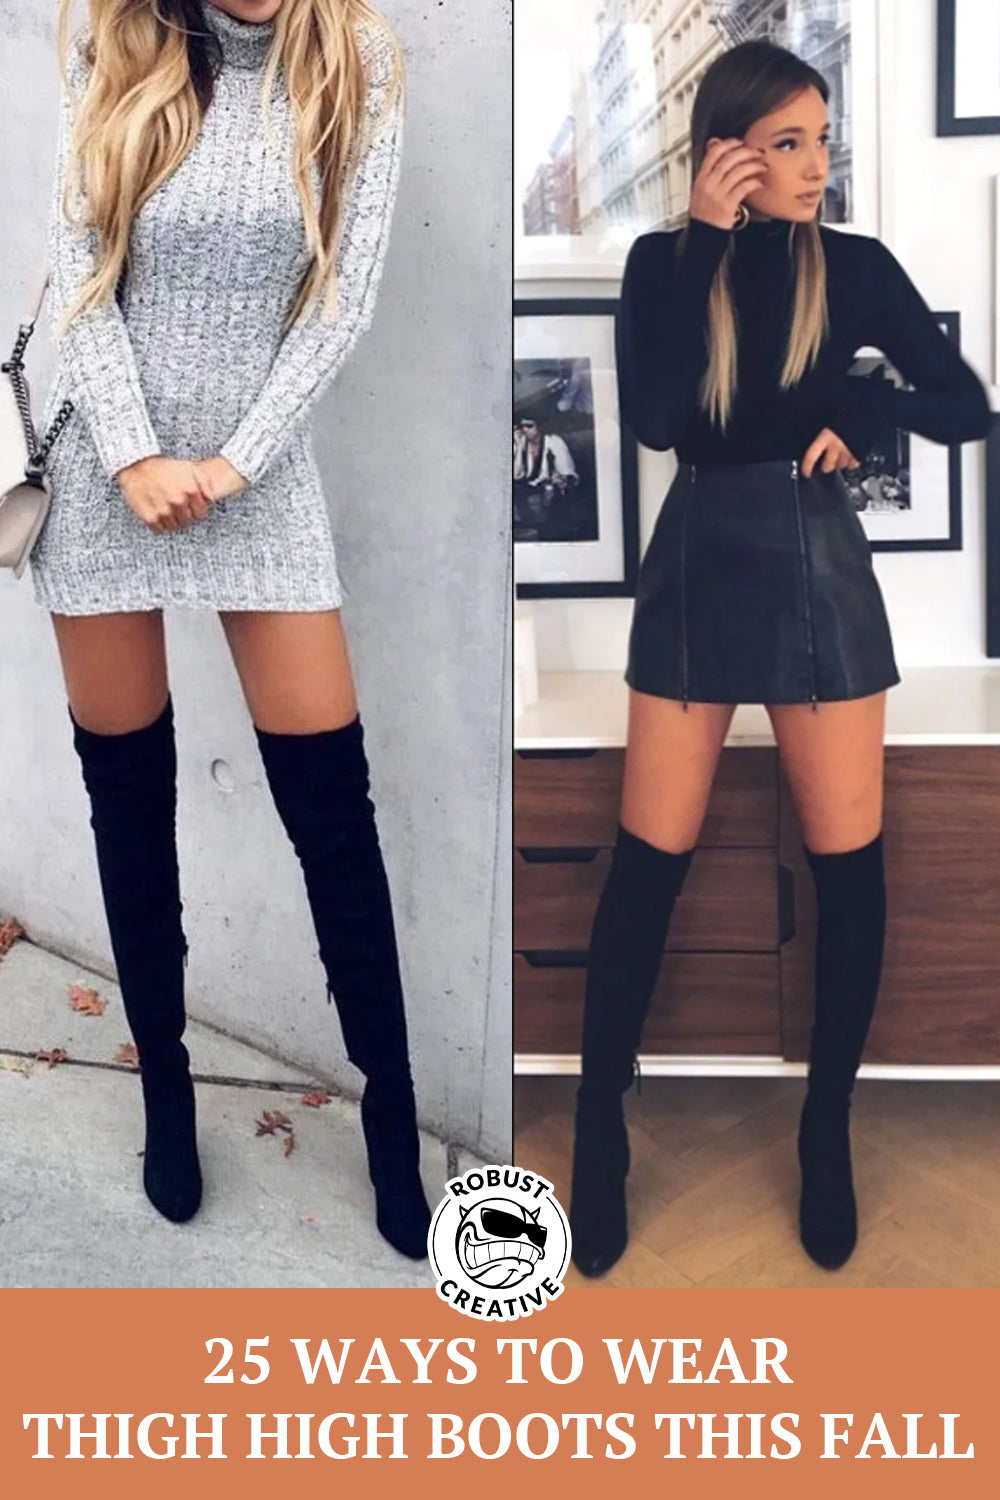 Best of Pictures of thigh high boots